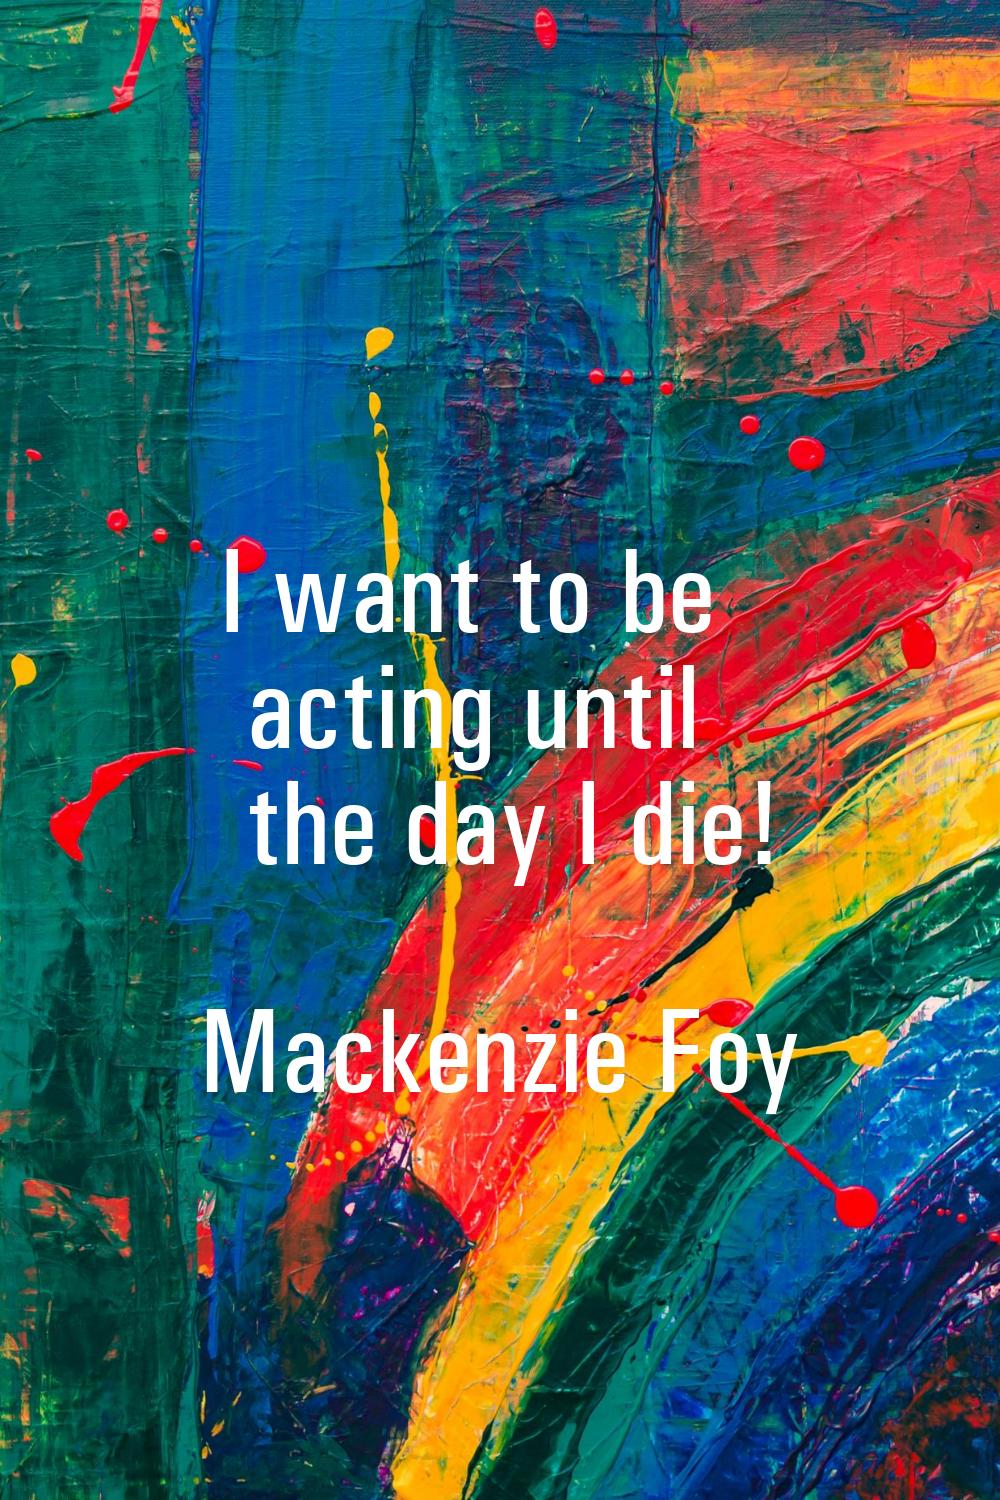 I want to be acting until the day I die!